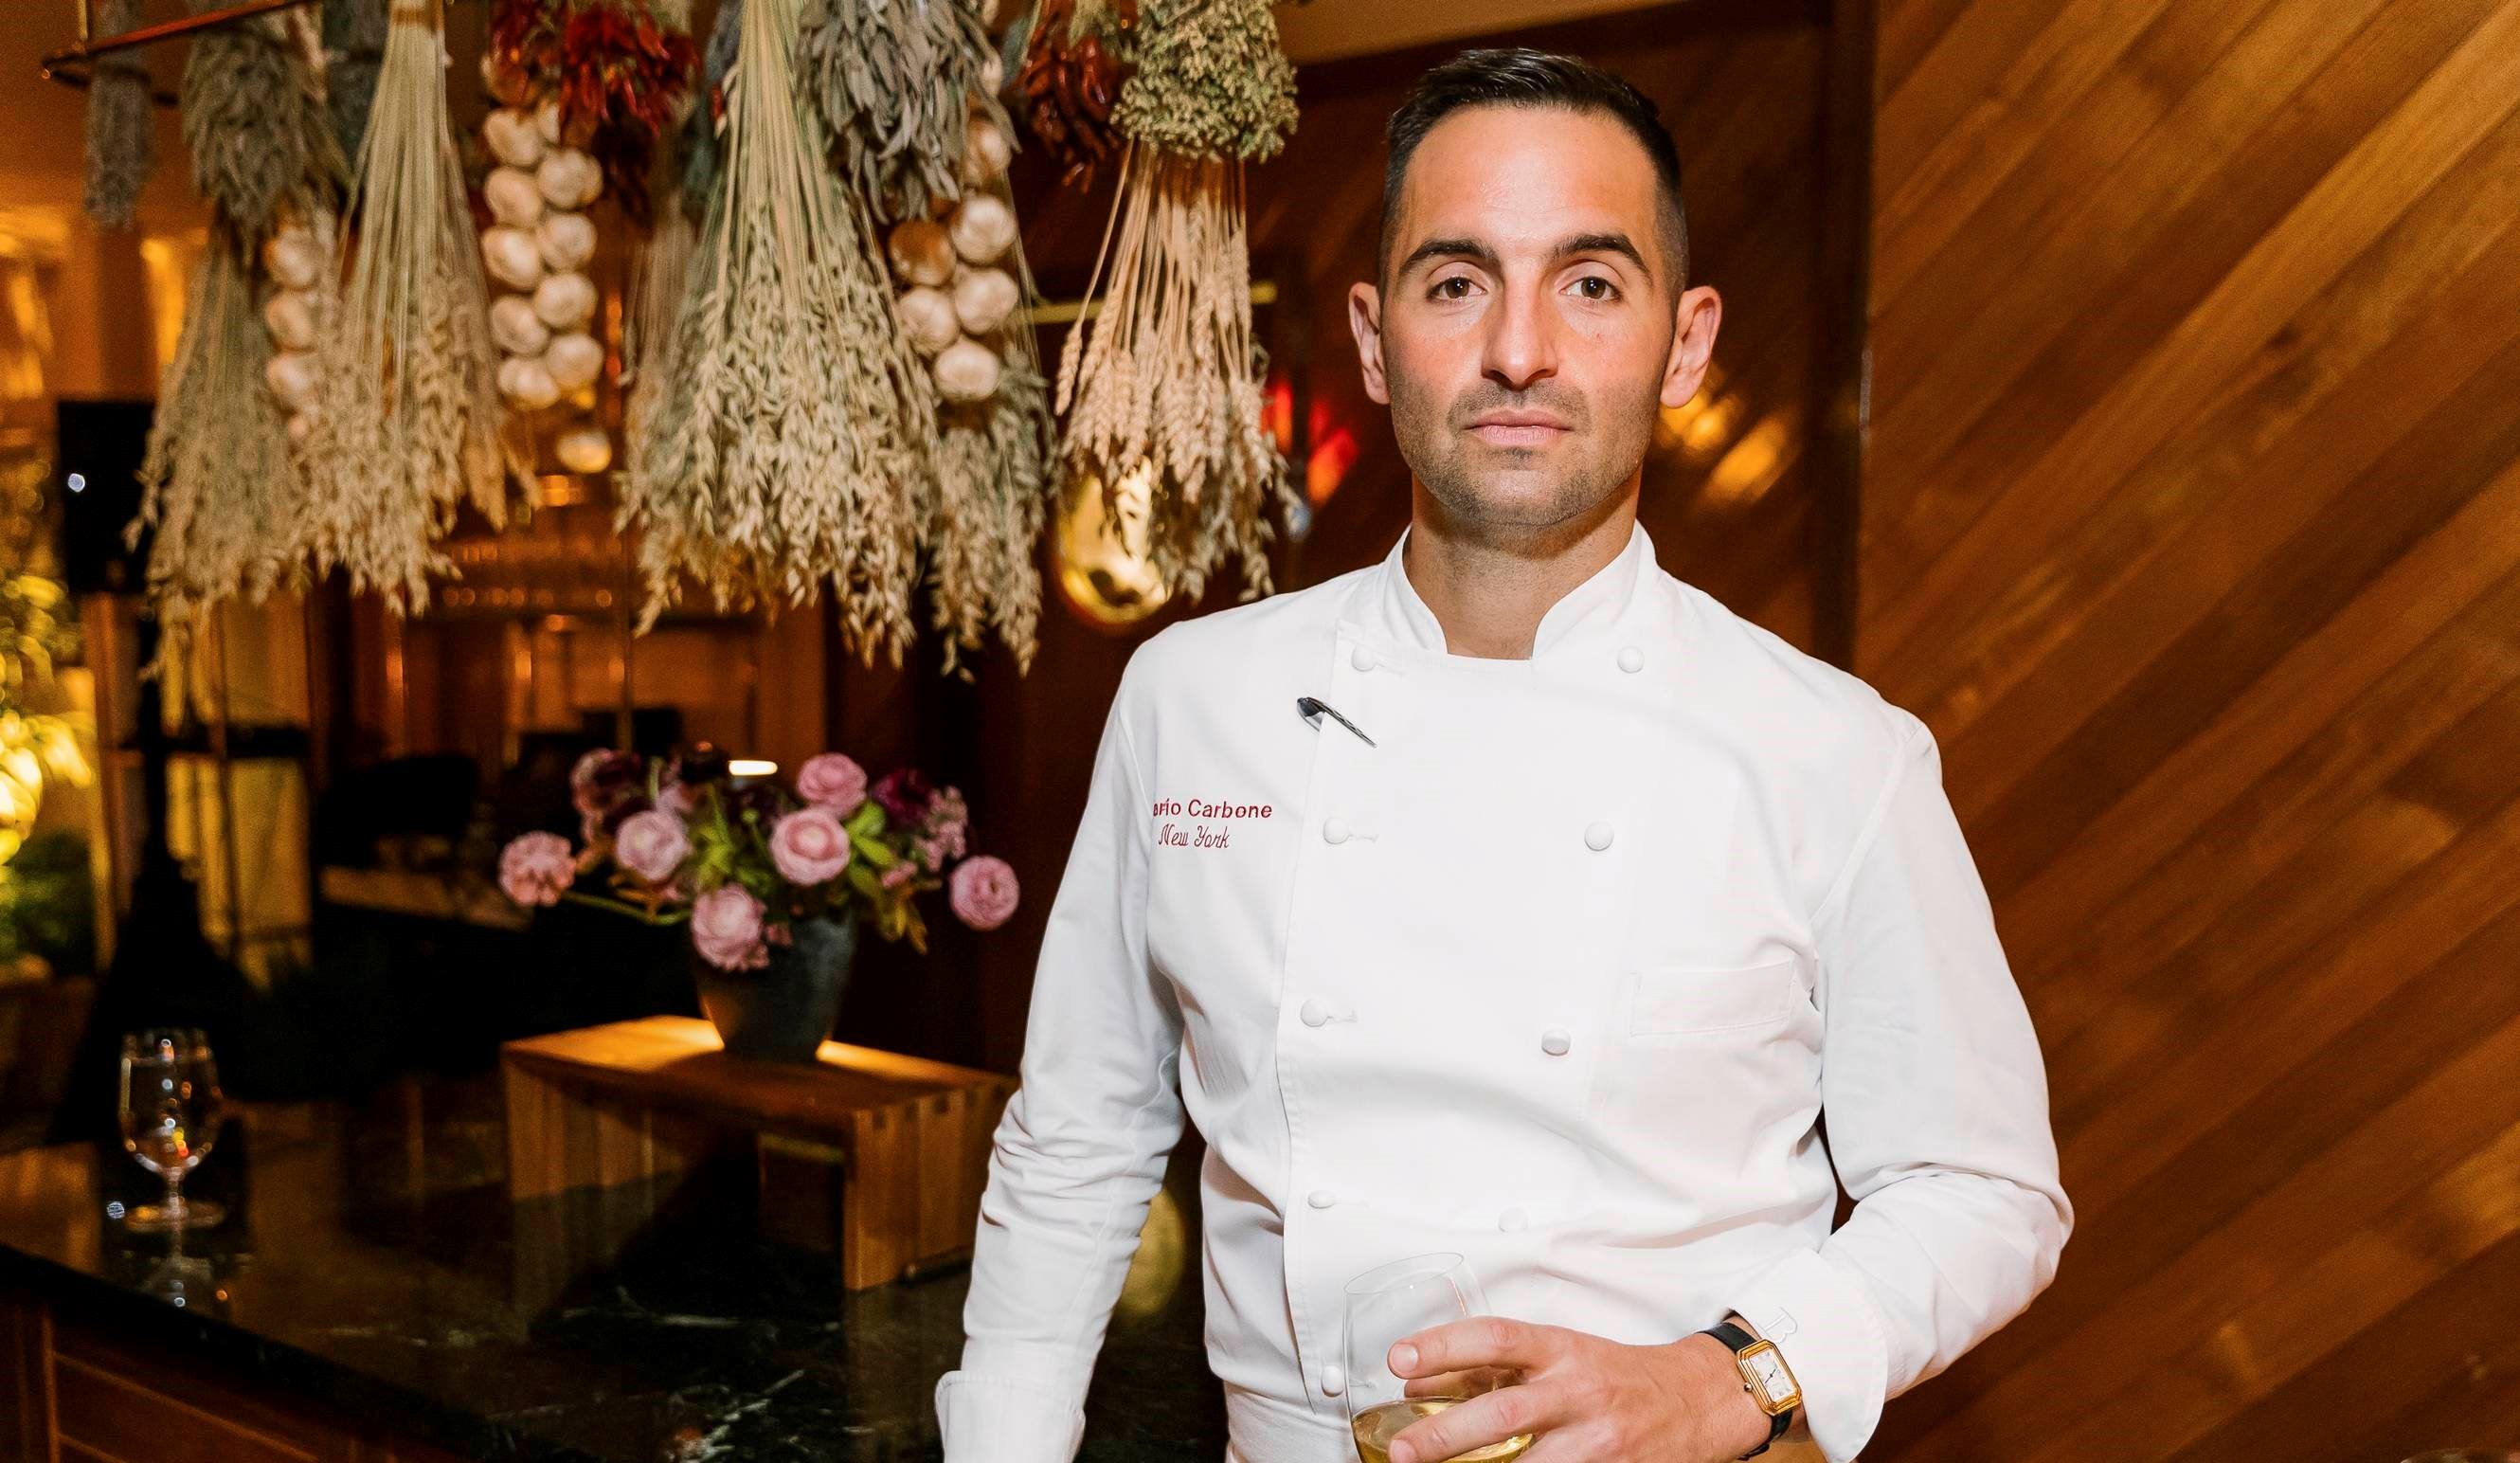 Mario Carbone Interview: Reservations at Carbone, Buy Sauce Online